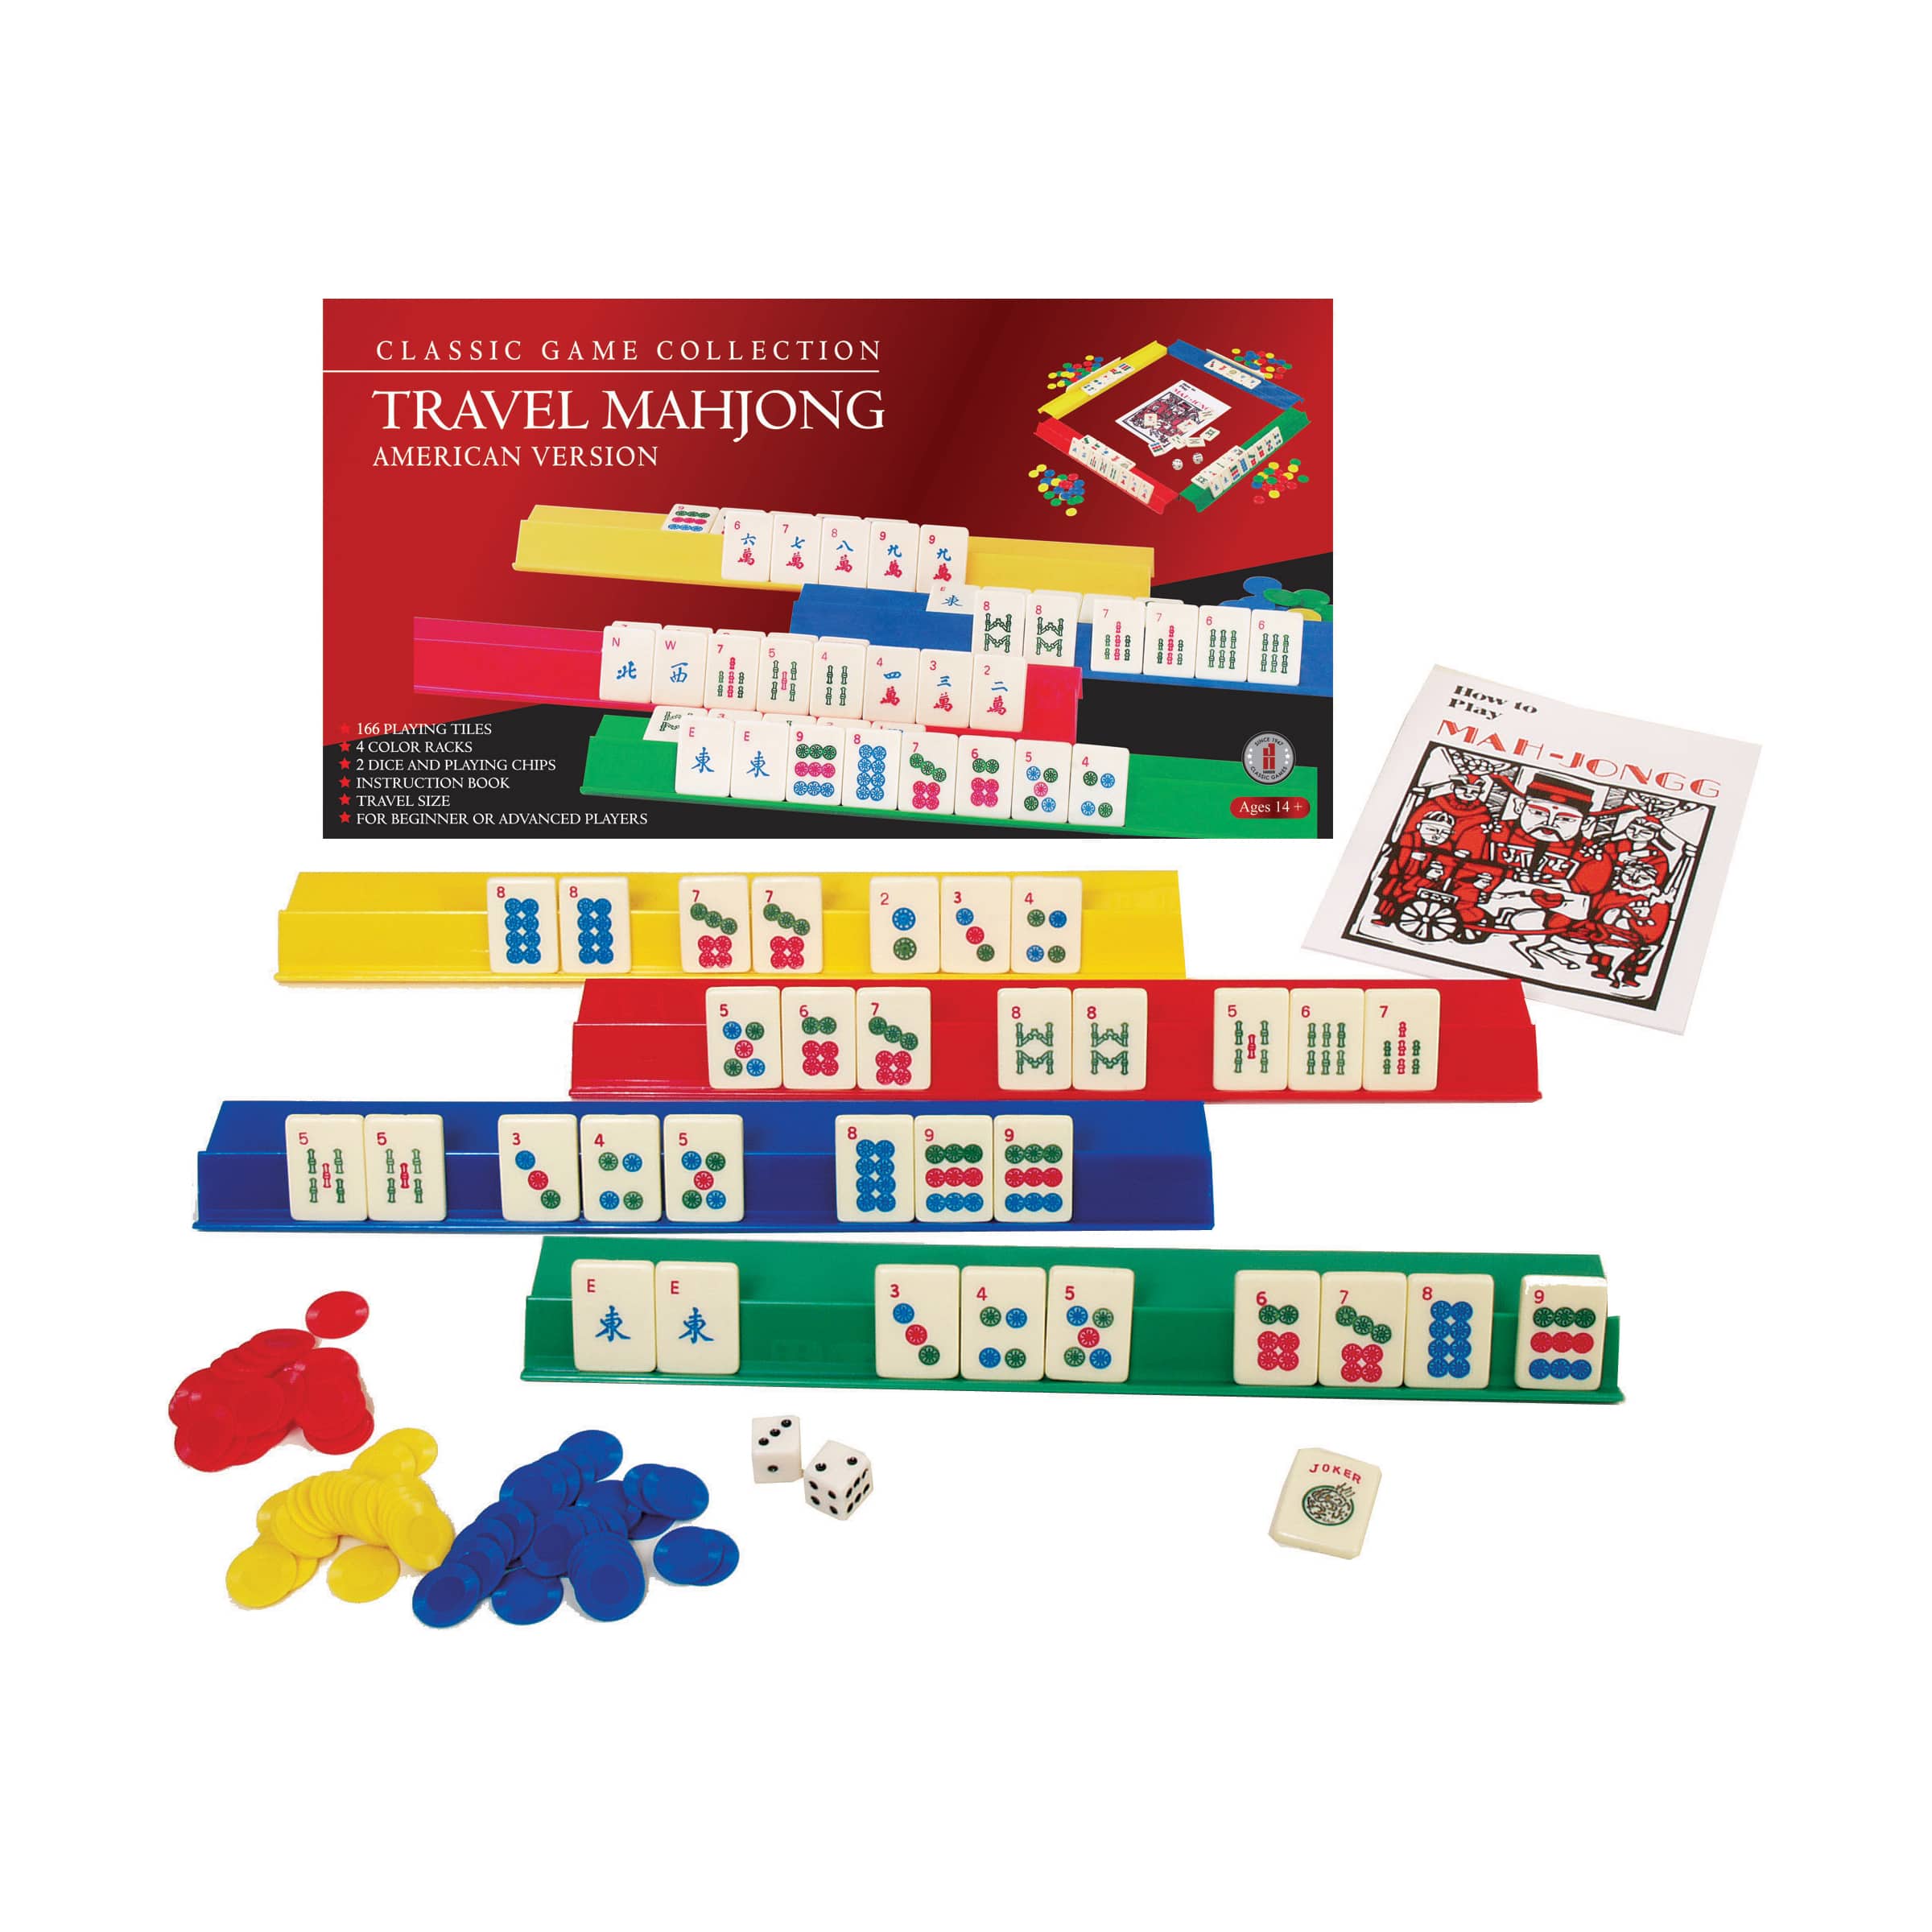 Classic Game Collection Travel Mah Jong